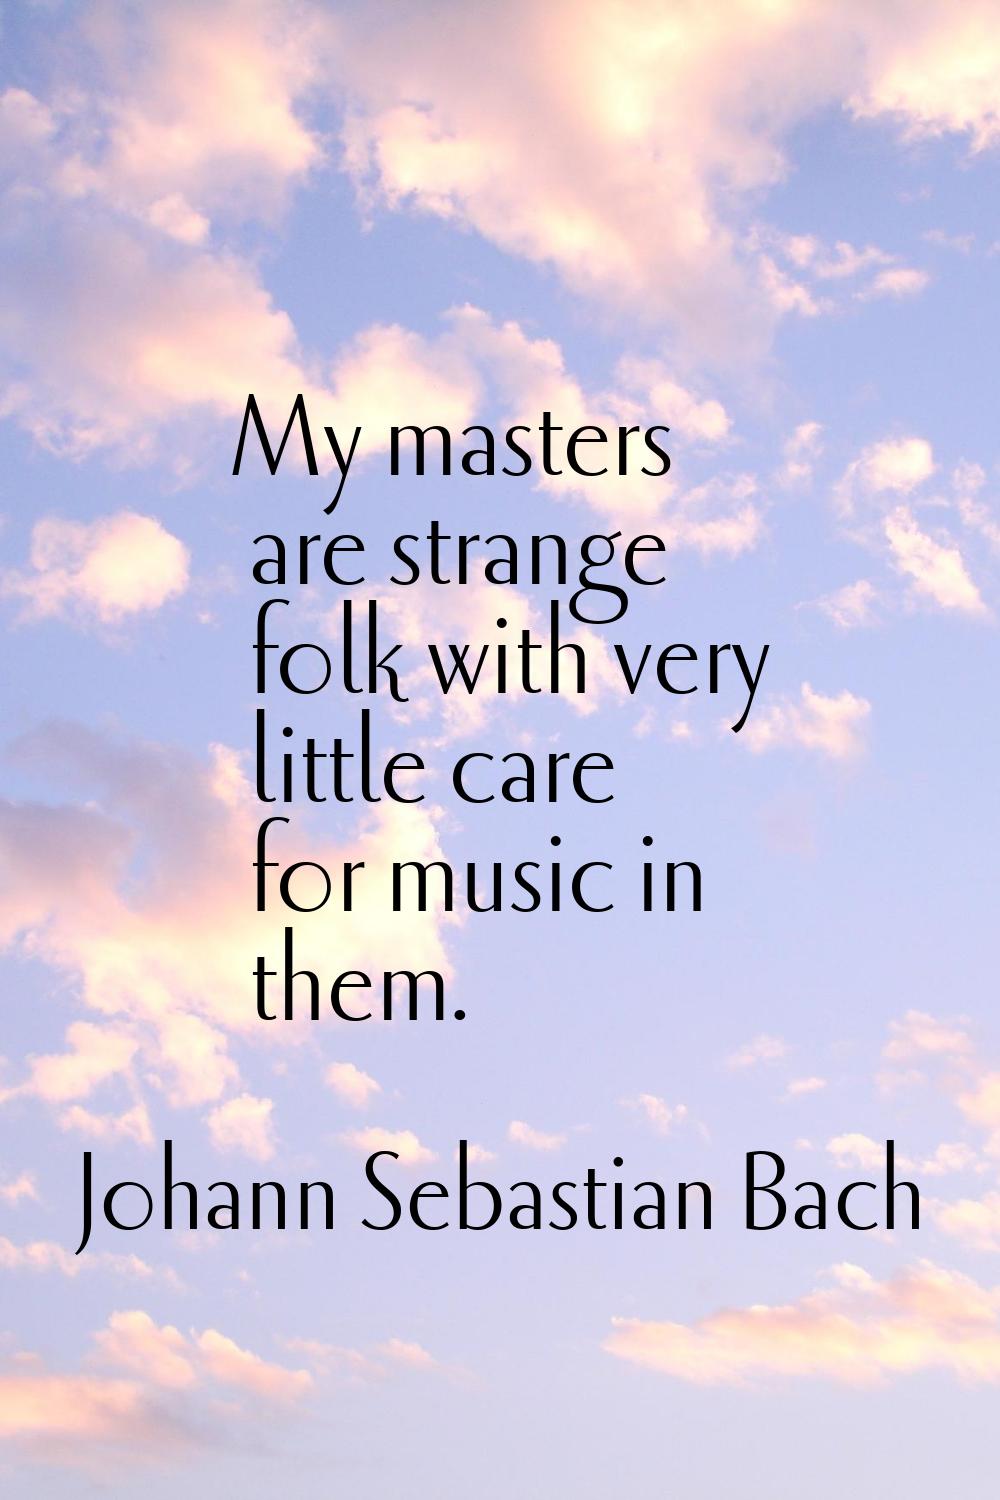 My masters are strange folk with very little care for music in them.